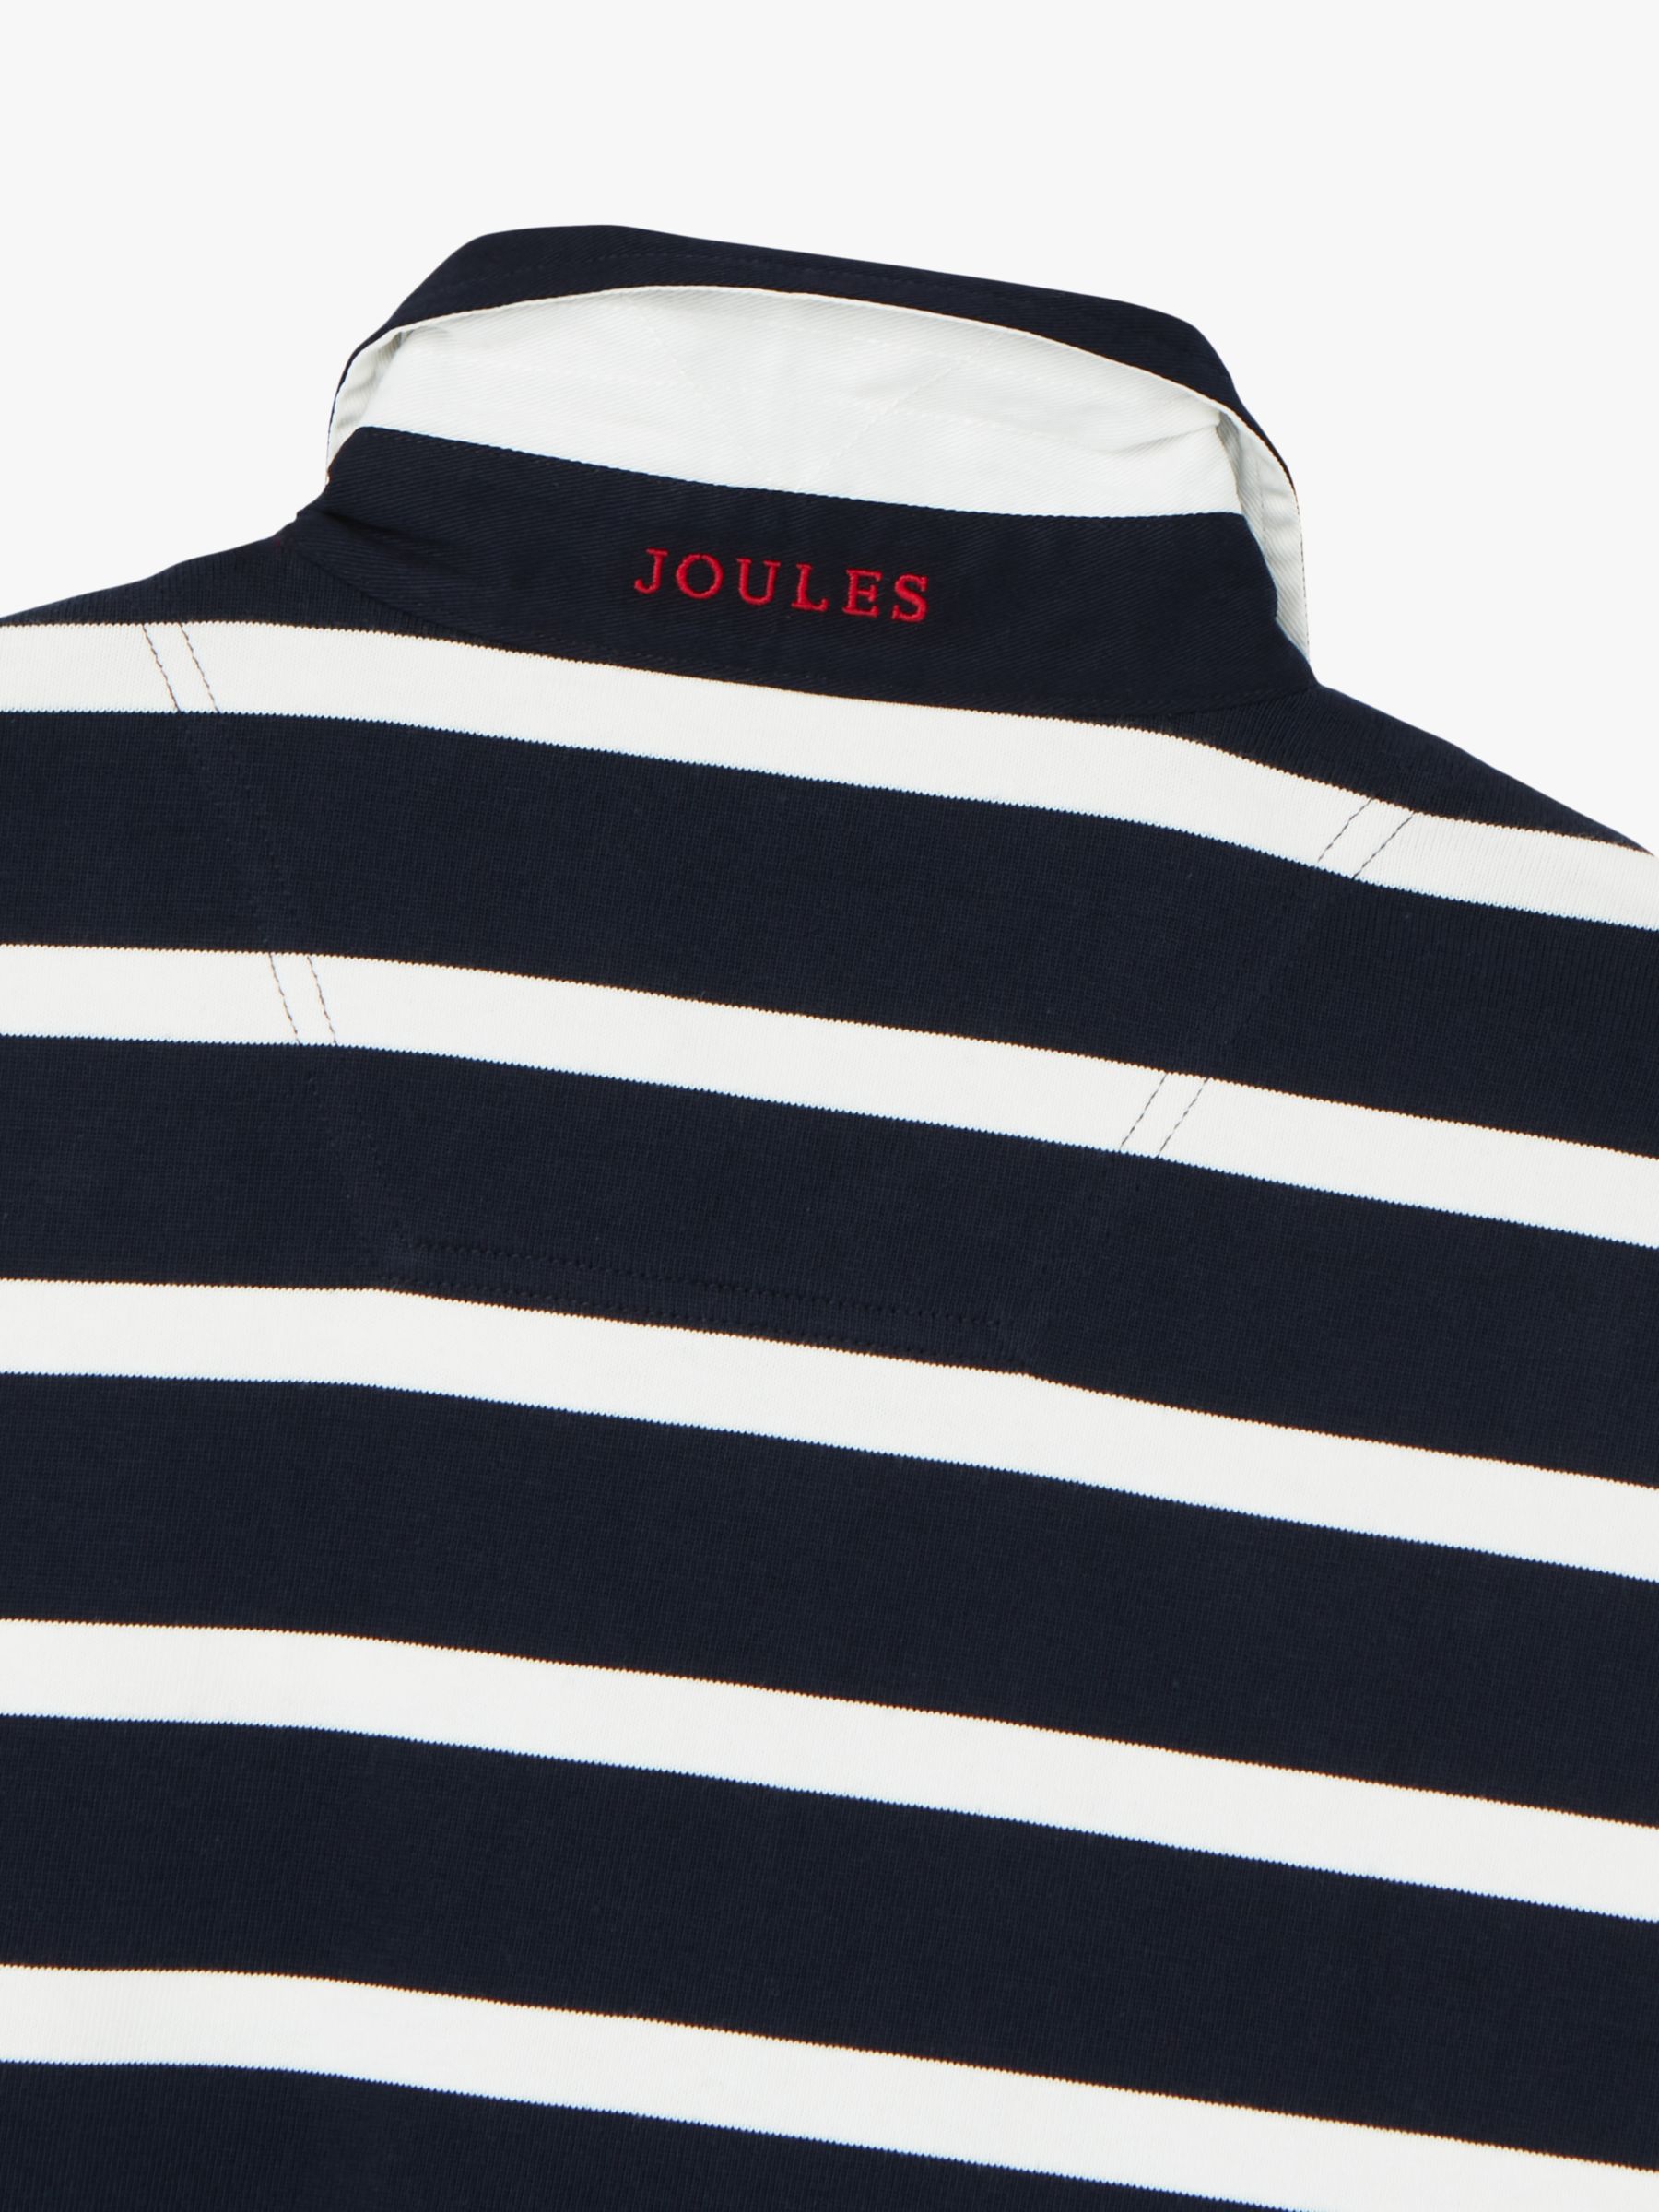 Joules Onside Cotton Stripe Rugby Polo Shirt, Navy/White